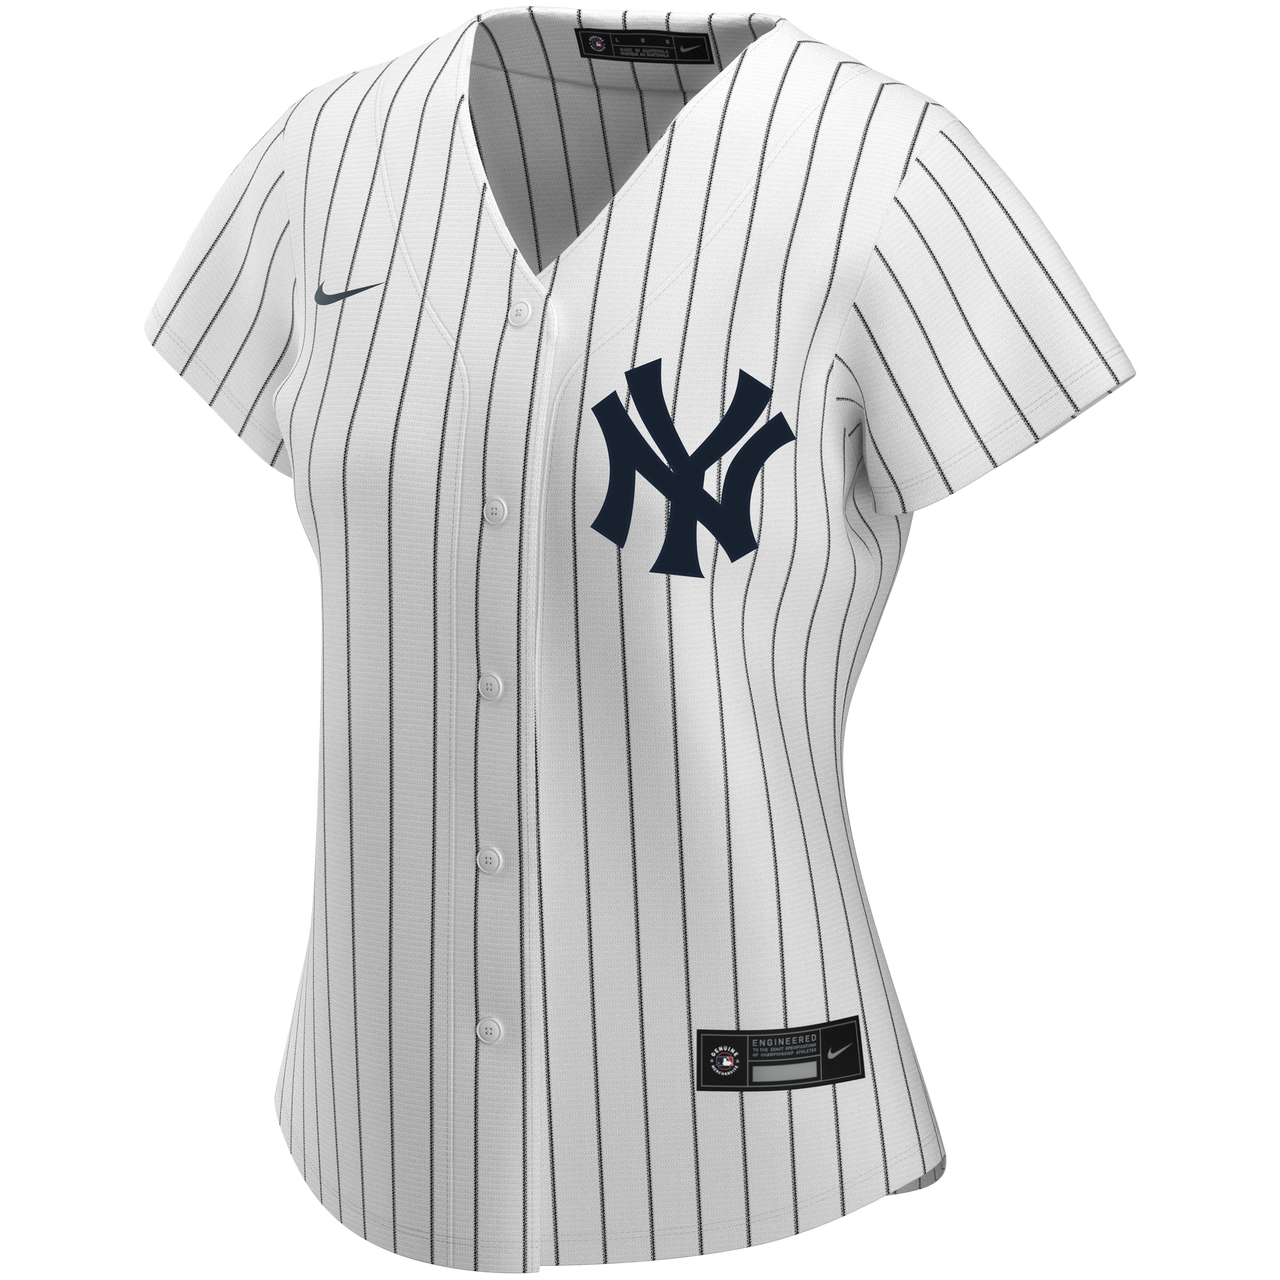 Alex Rodriguez NY Yankees Replica Youth Road Jersey